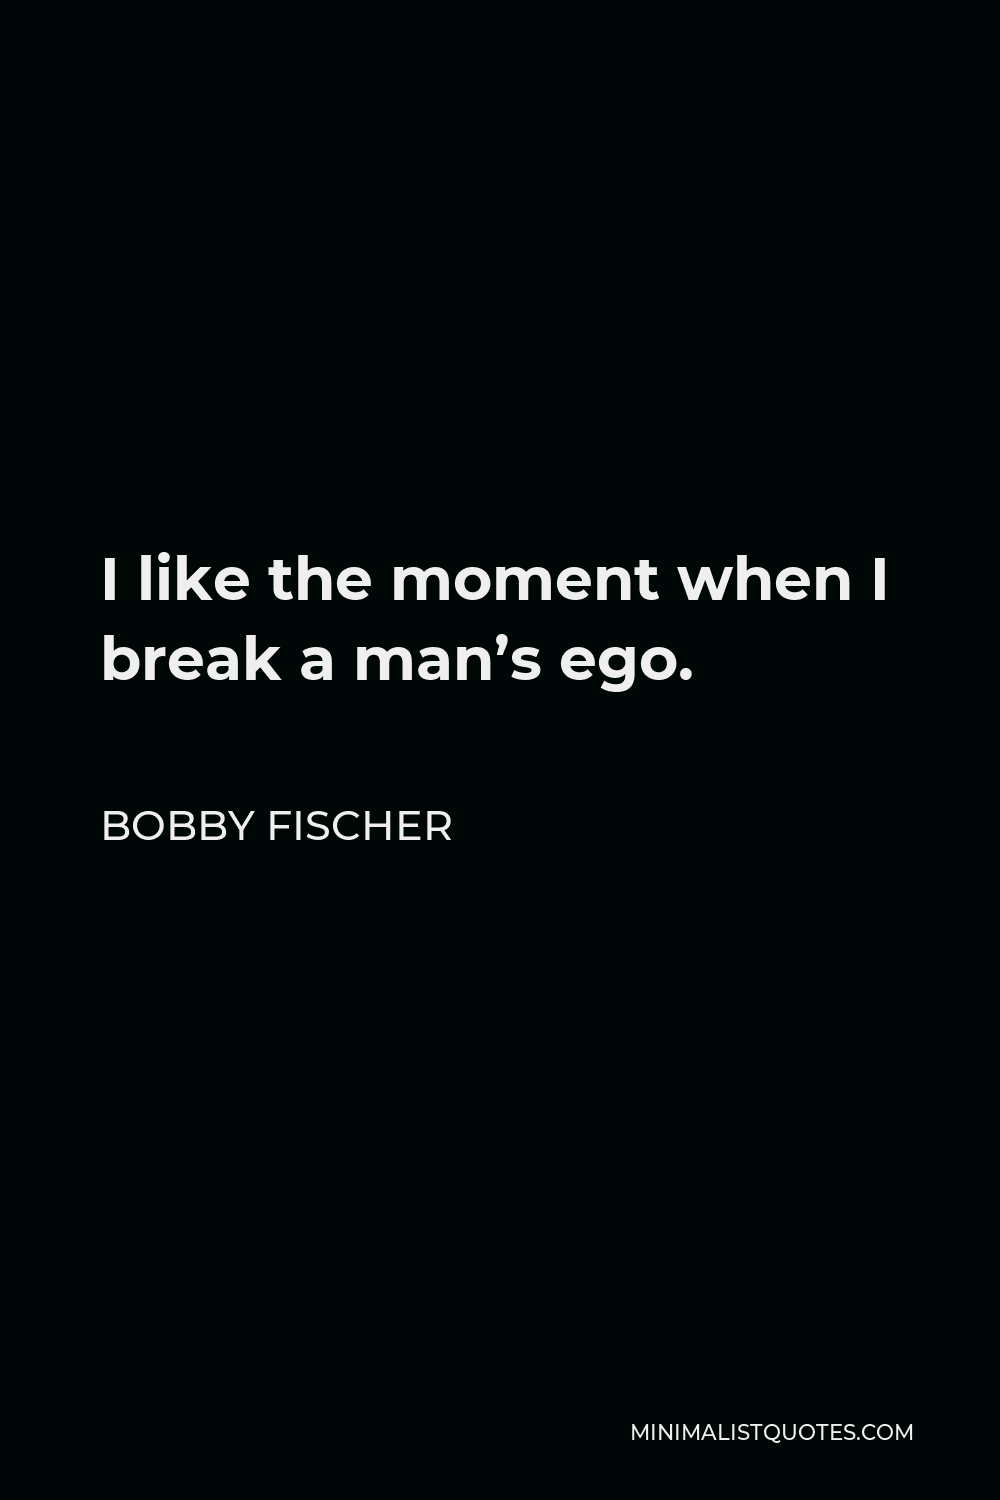 Bobby Fischer Quote - I like the moment when I break a man’s ego.